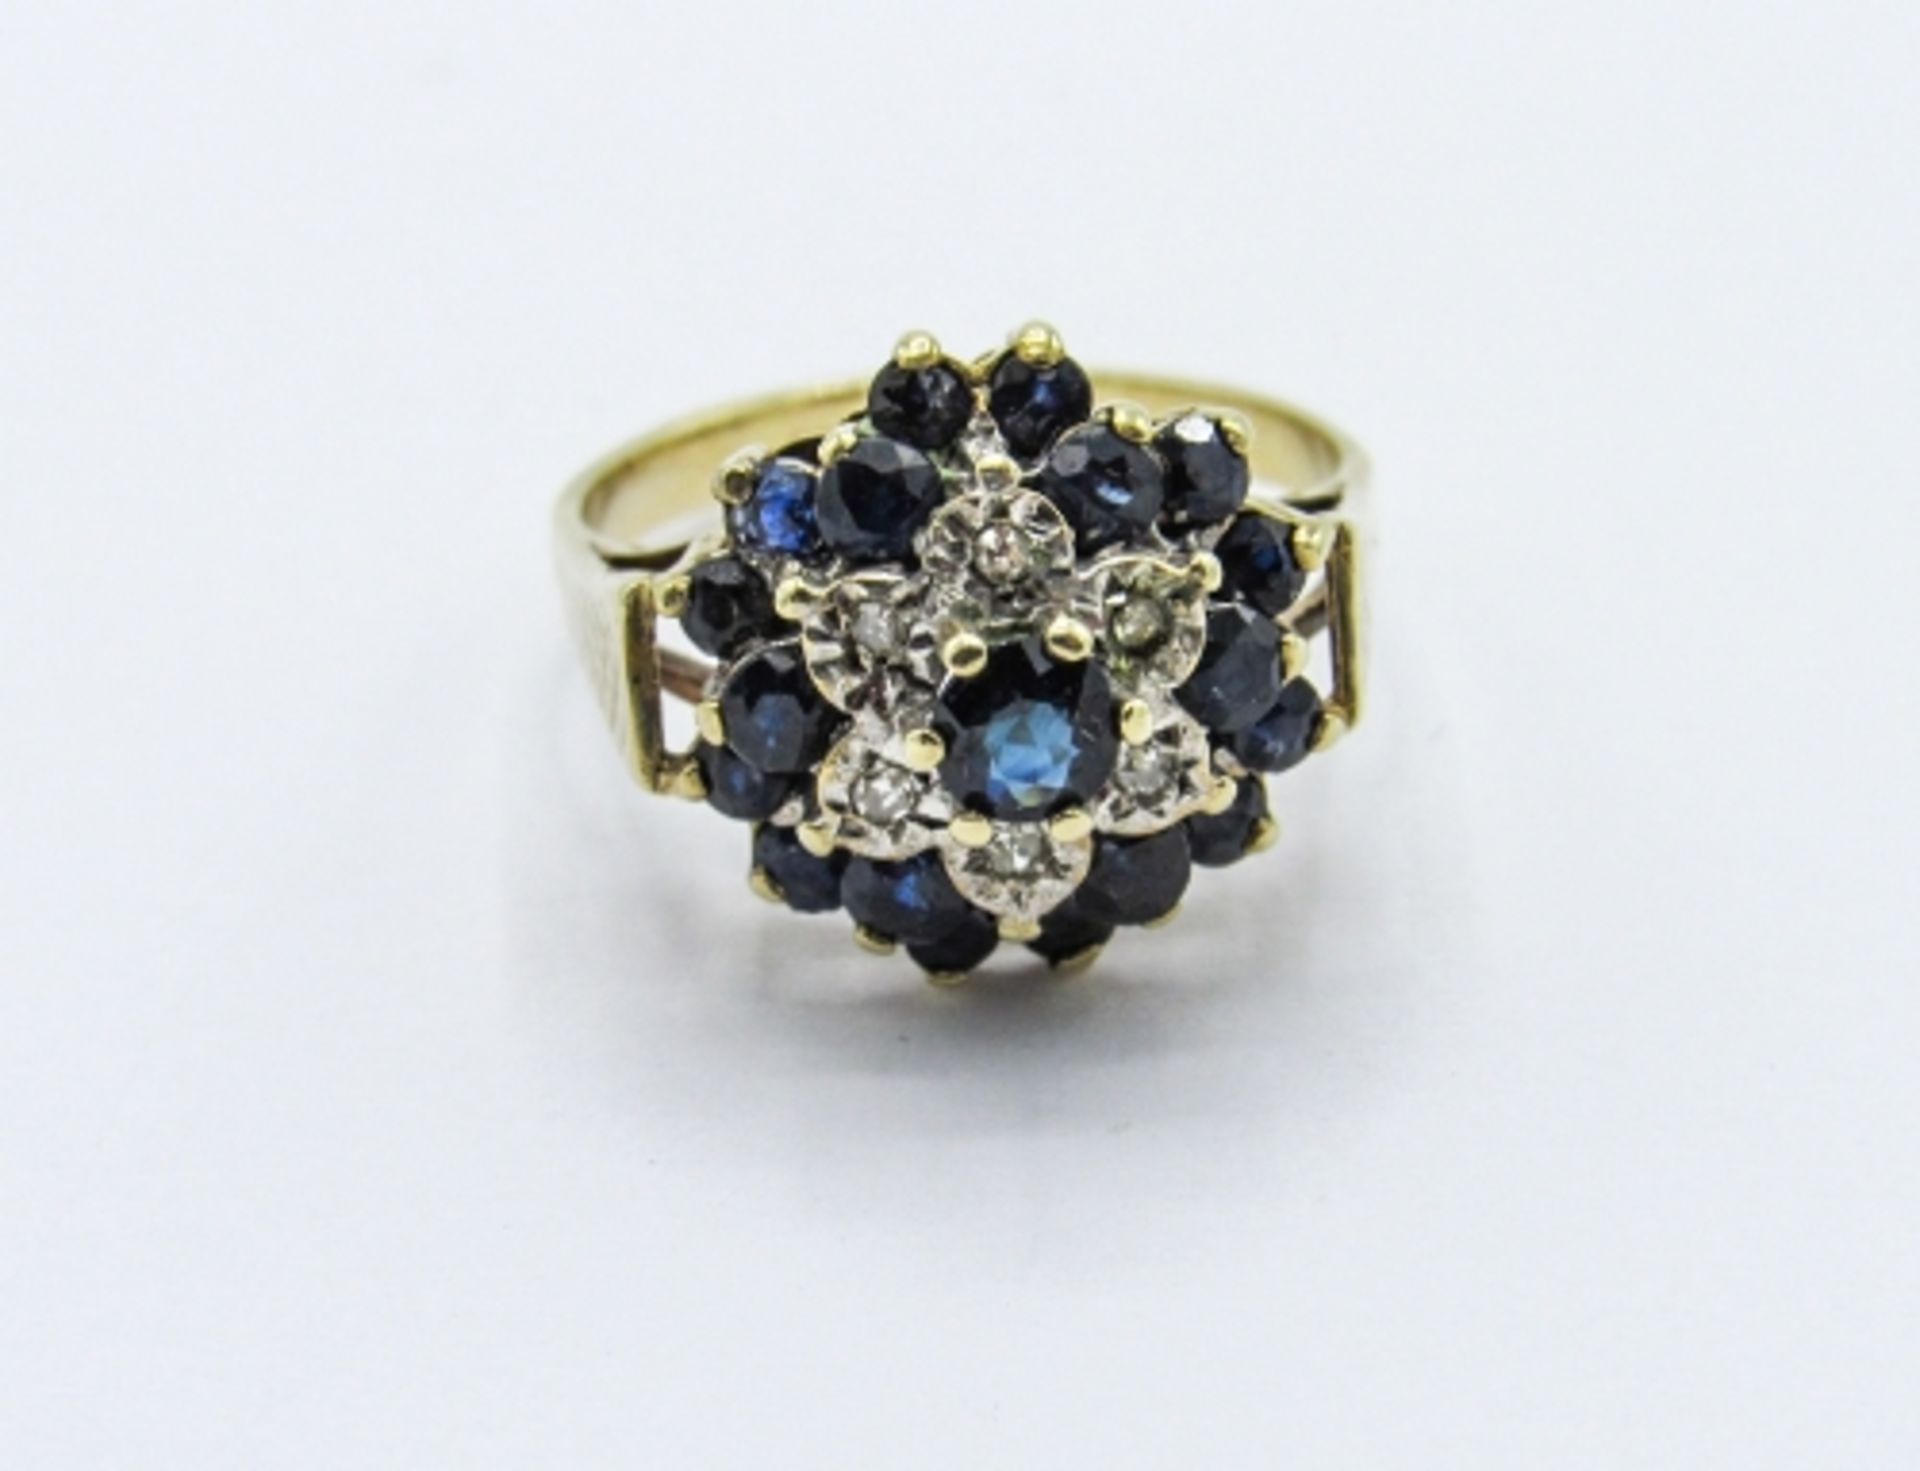 9ct gold sapphire & diamond ring, weight 3.7gms, size M. Estimate £130-150